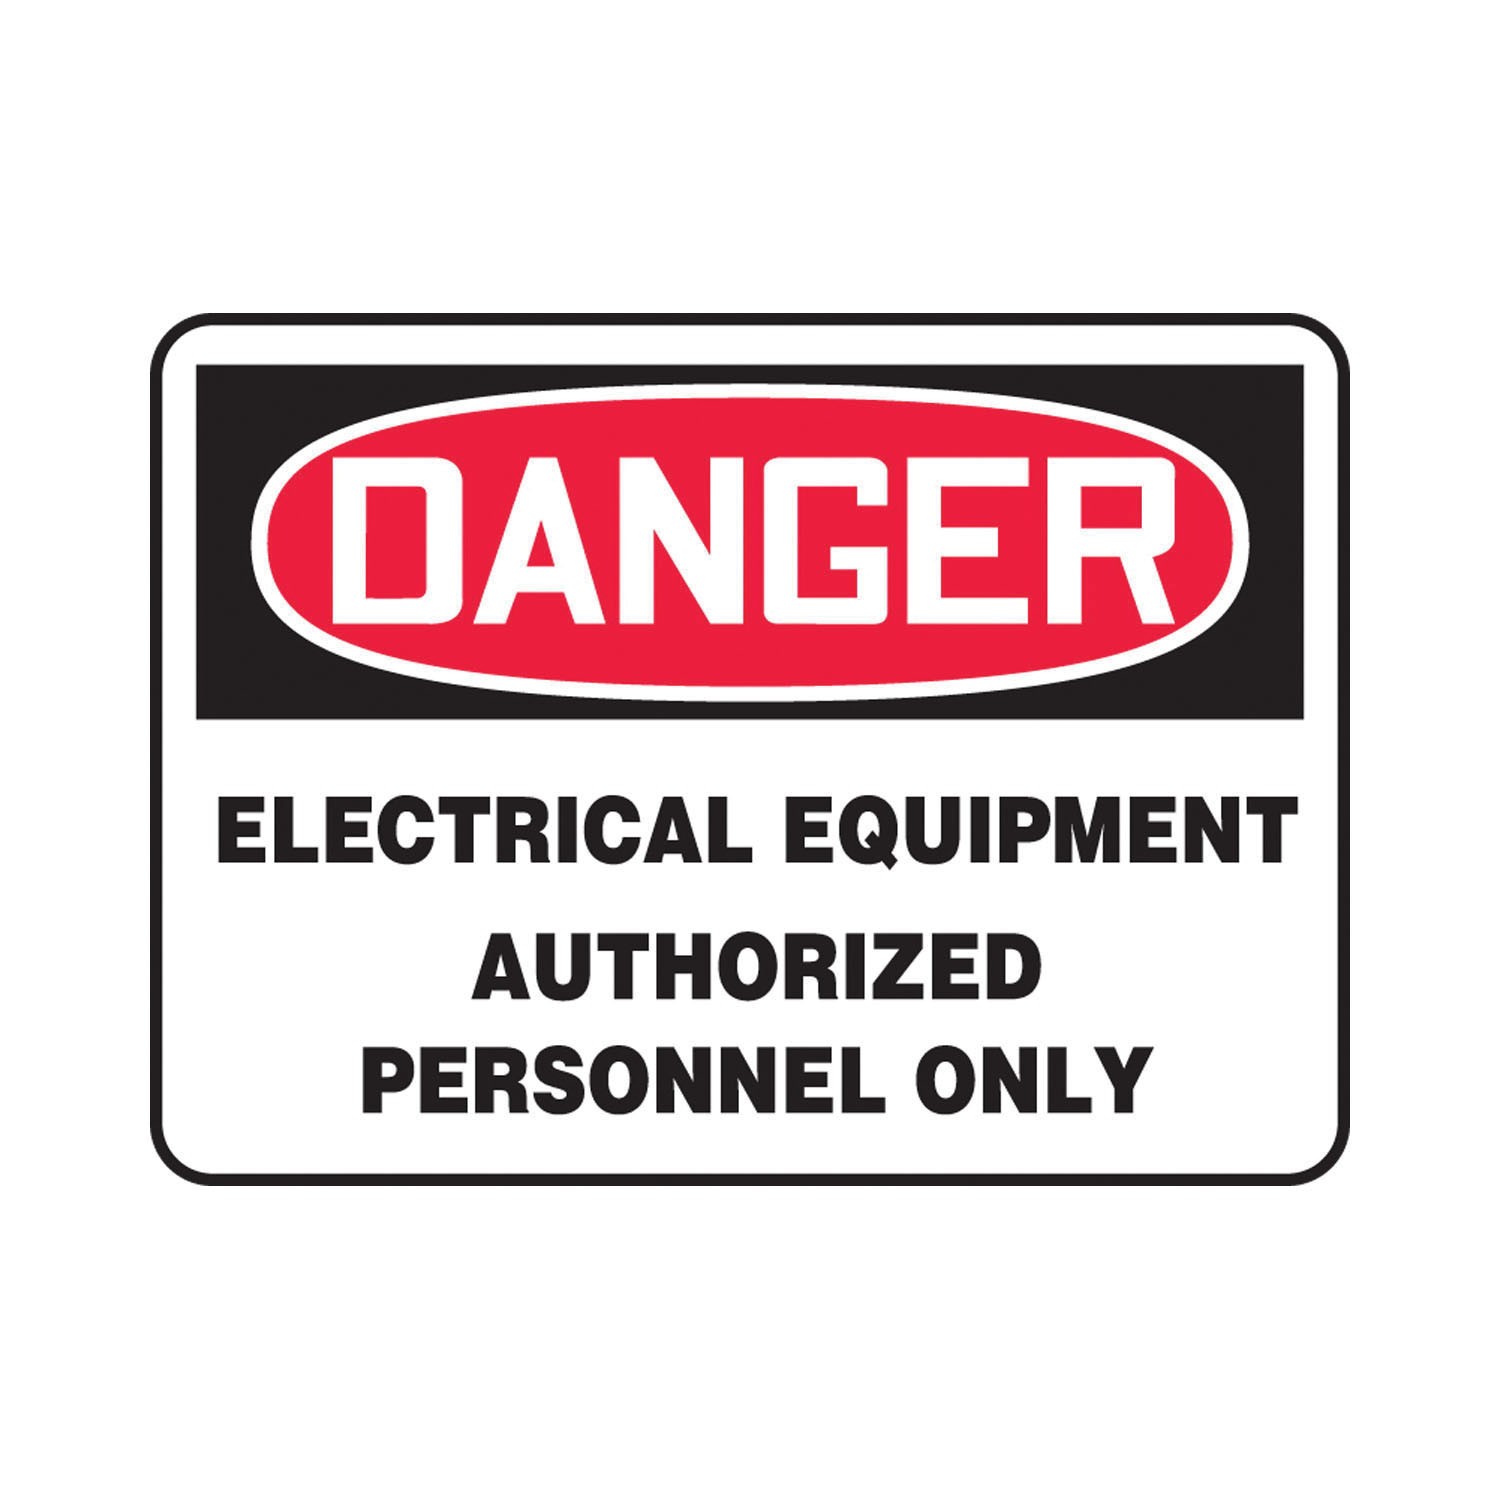 OSHA Danger Safety Sign: Electrical Equipment Authorized Personnel Only - Safety Signs, Labels & Tags